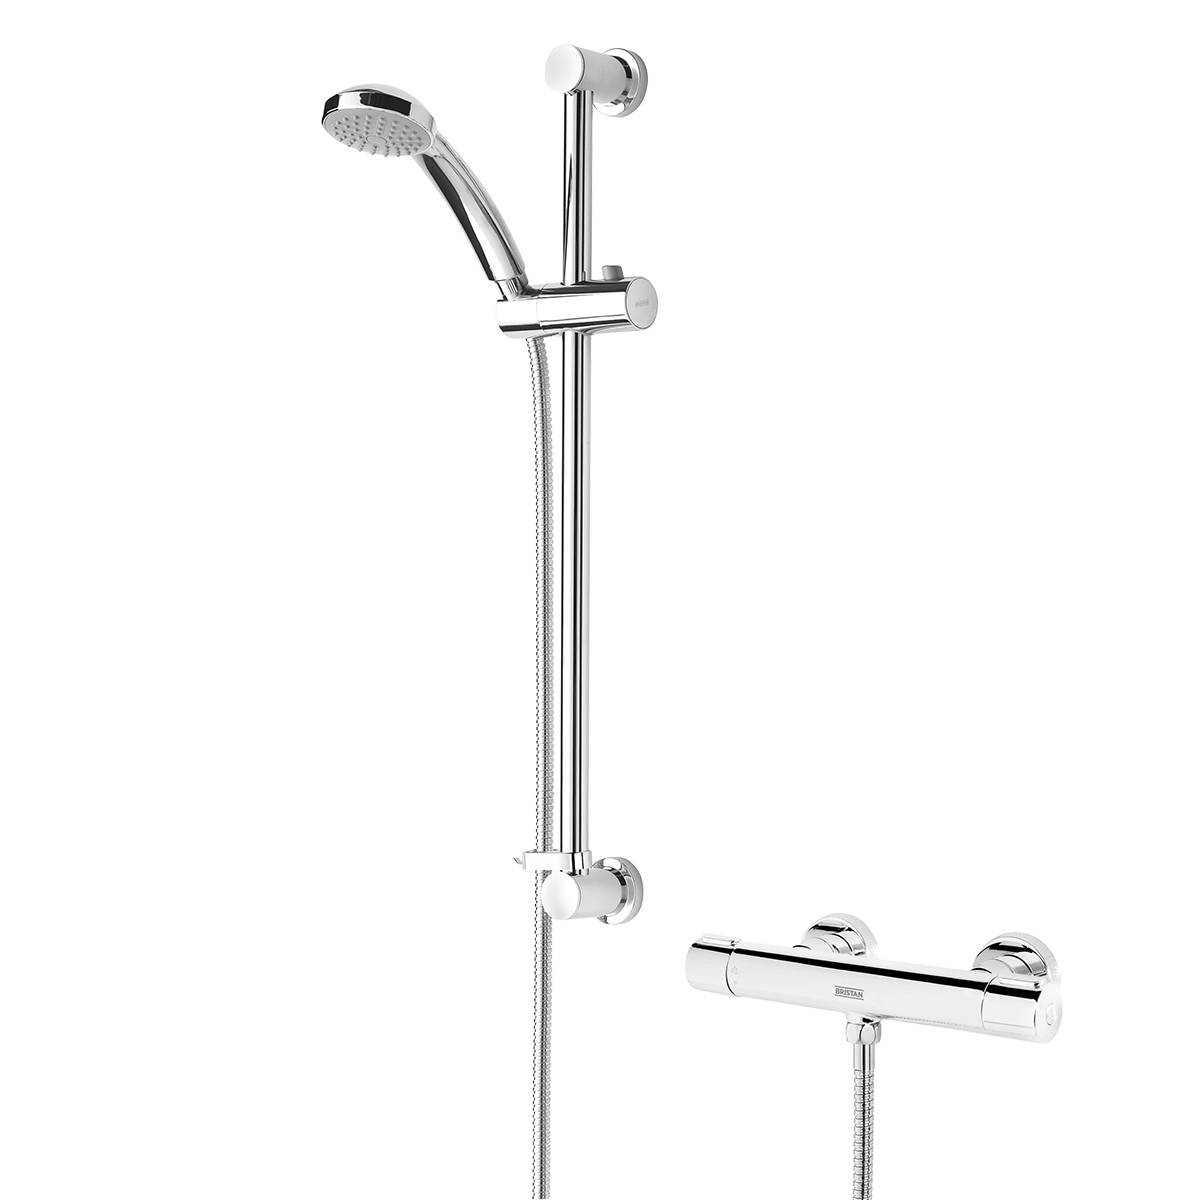 Frenzy Thermostatic Bar Shower With Multi Function Handset